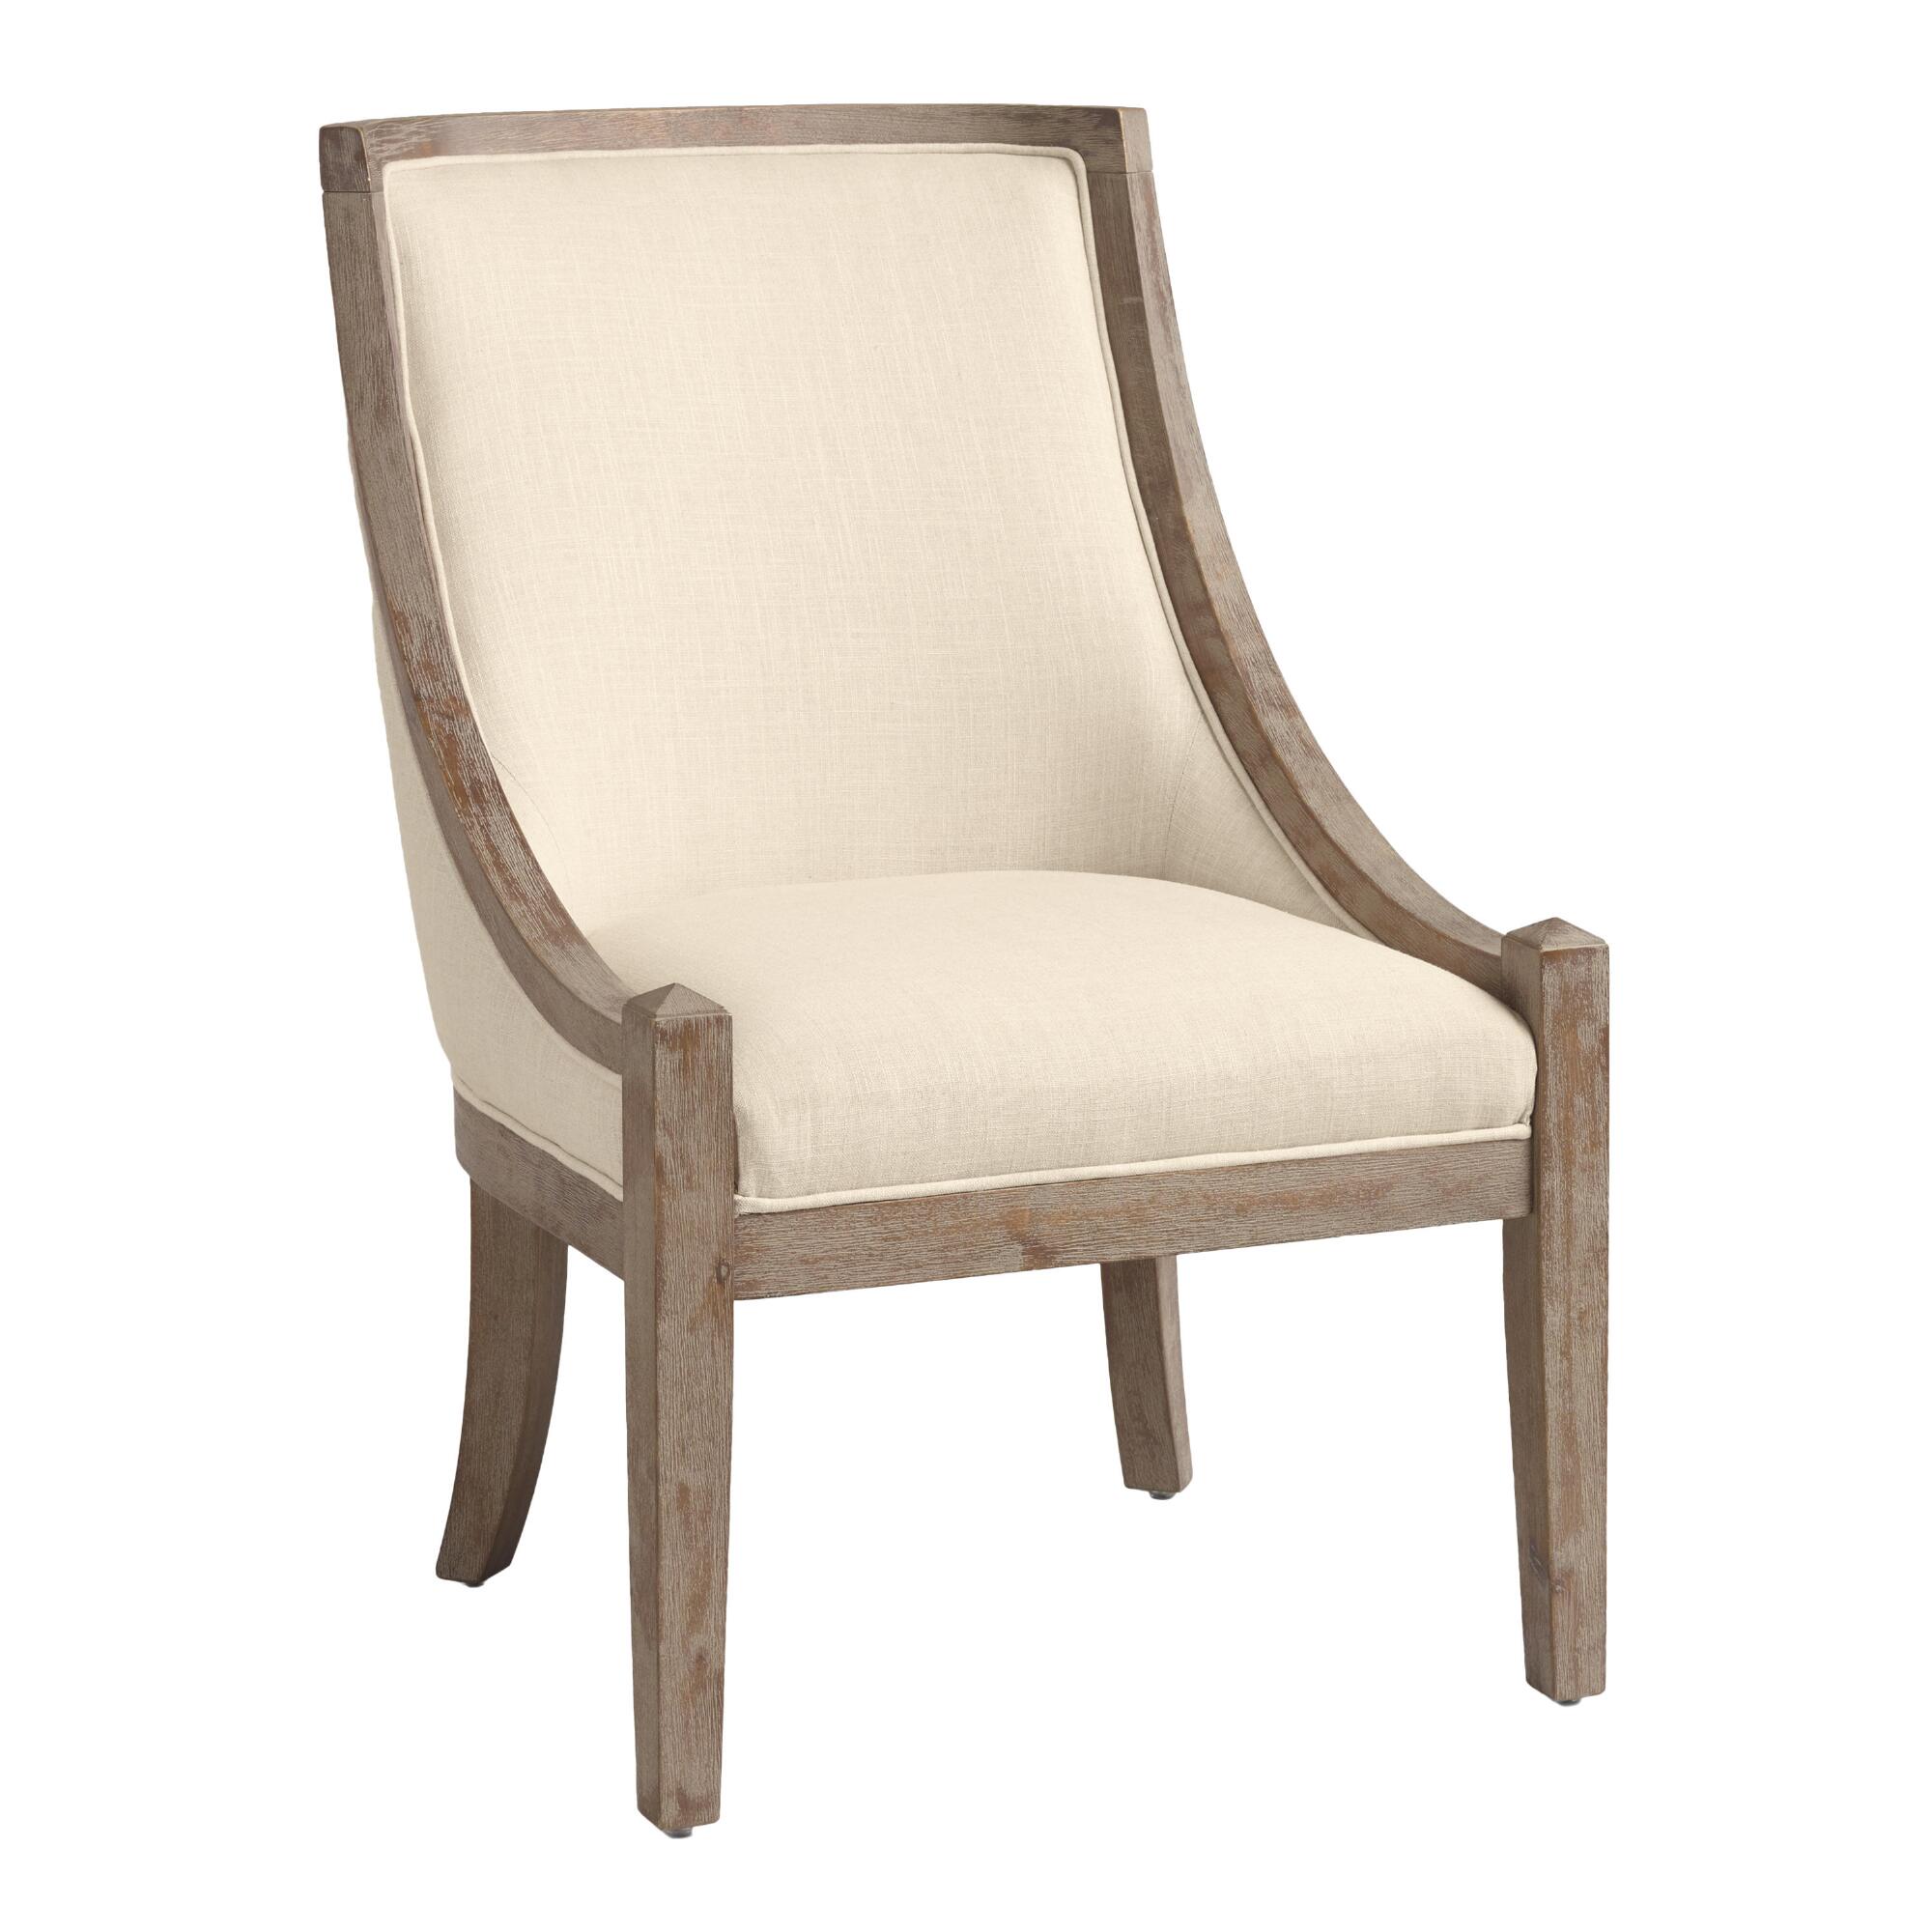 Distressed Wood High Back Henry Upholstered Chair: Natural - Fabric by World Market